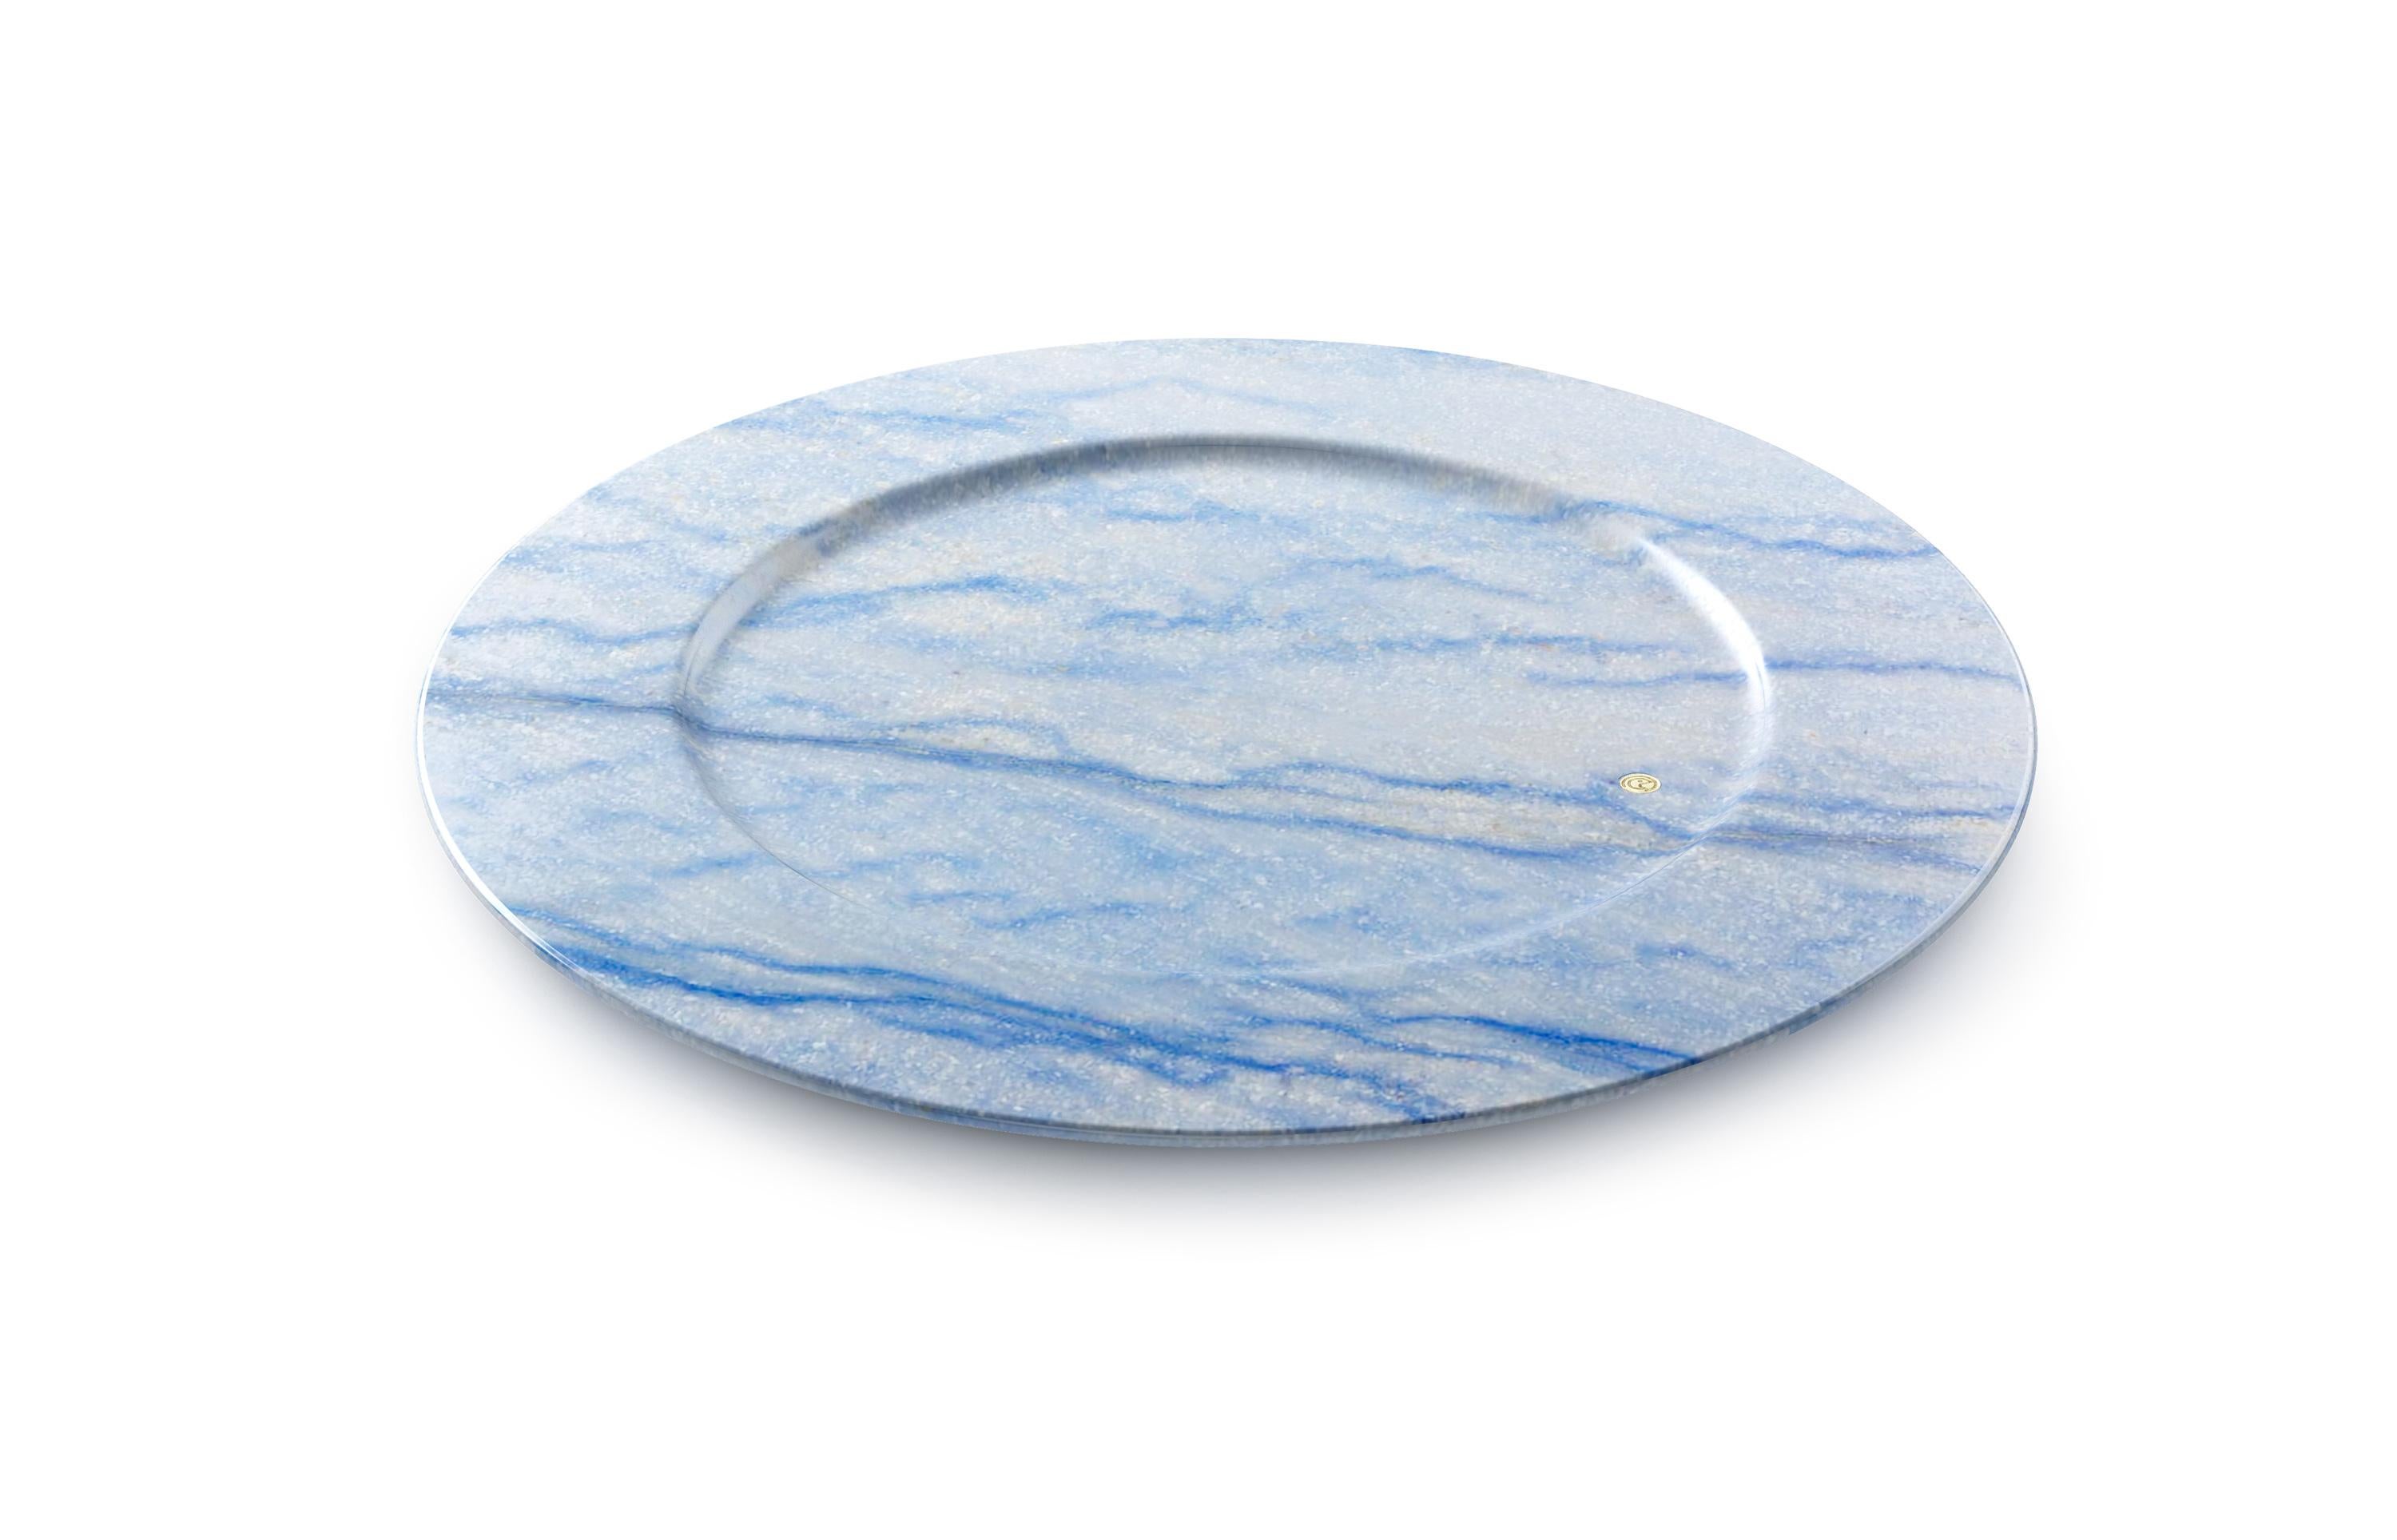 Hand-Carved Charger Plate Platters Serveware Set of 6 Blue Azul Macaubas Marble Handmade For Sale